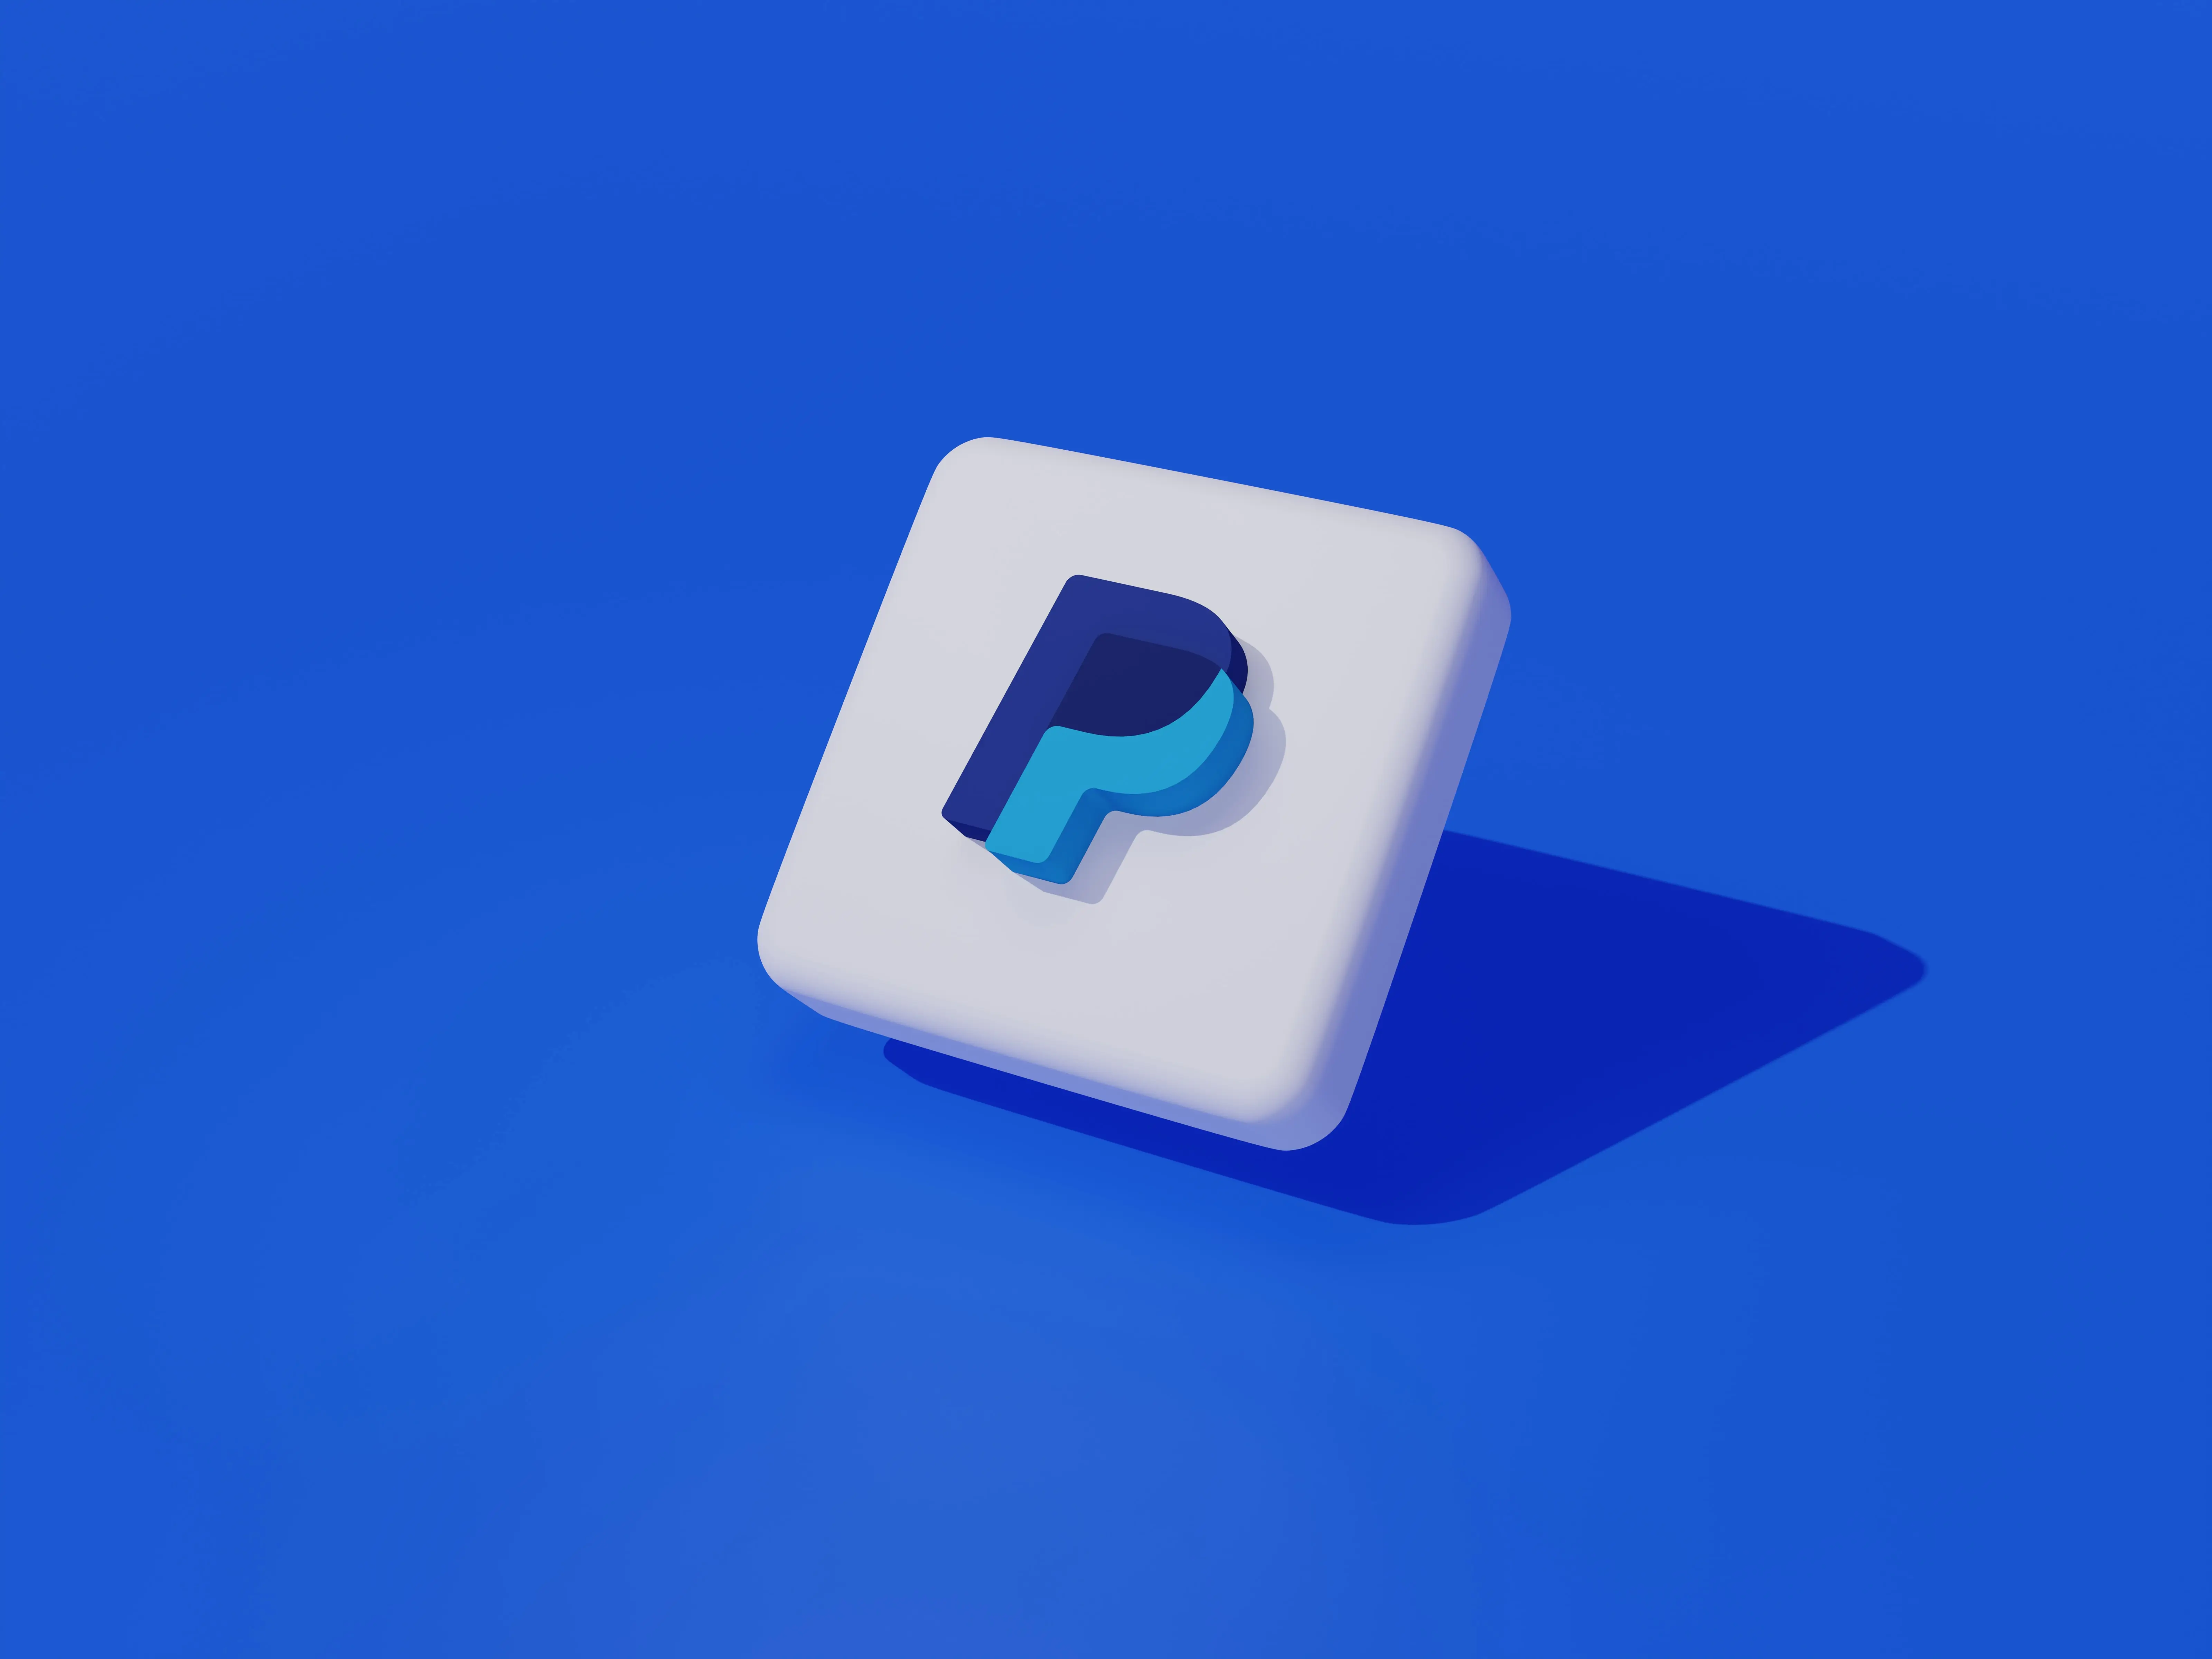 Alex Konanykhin shared his perspective on PayPal's recent announcement